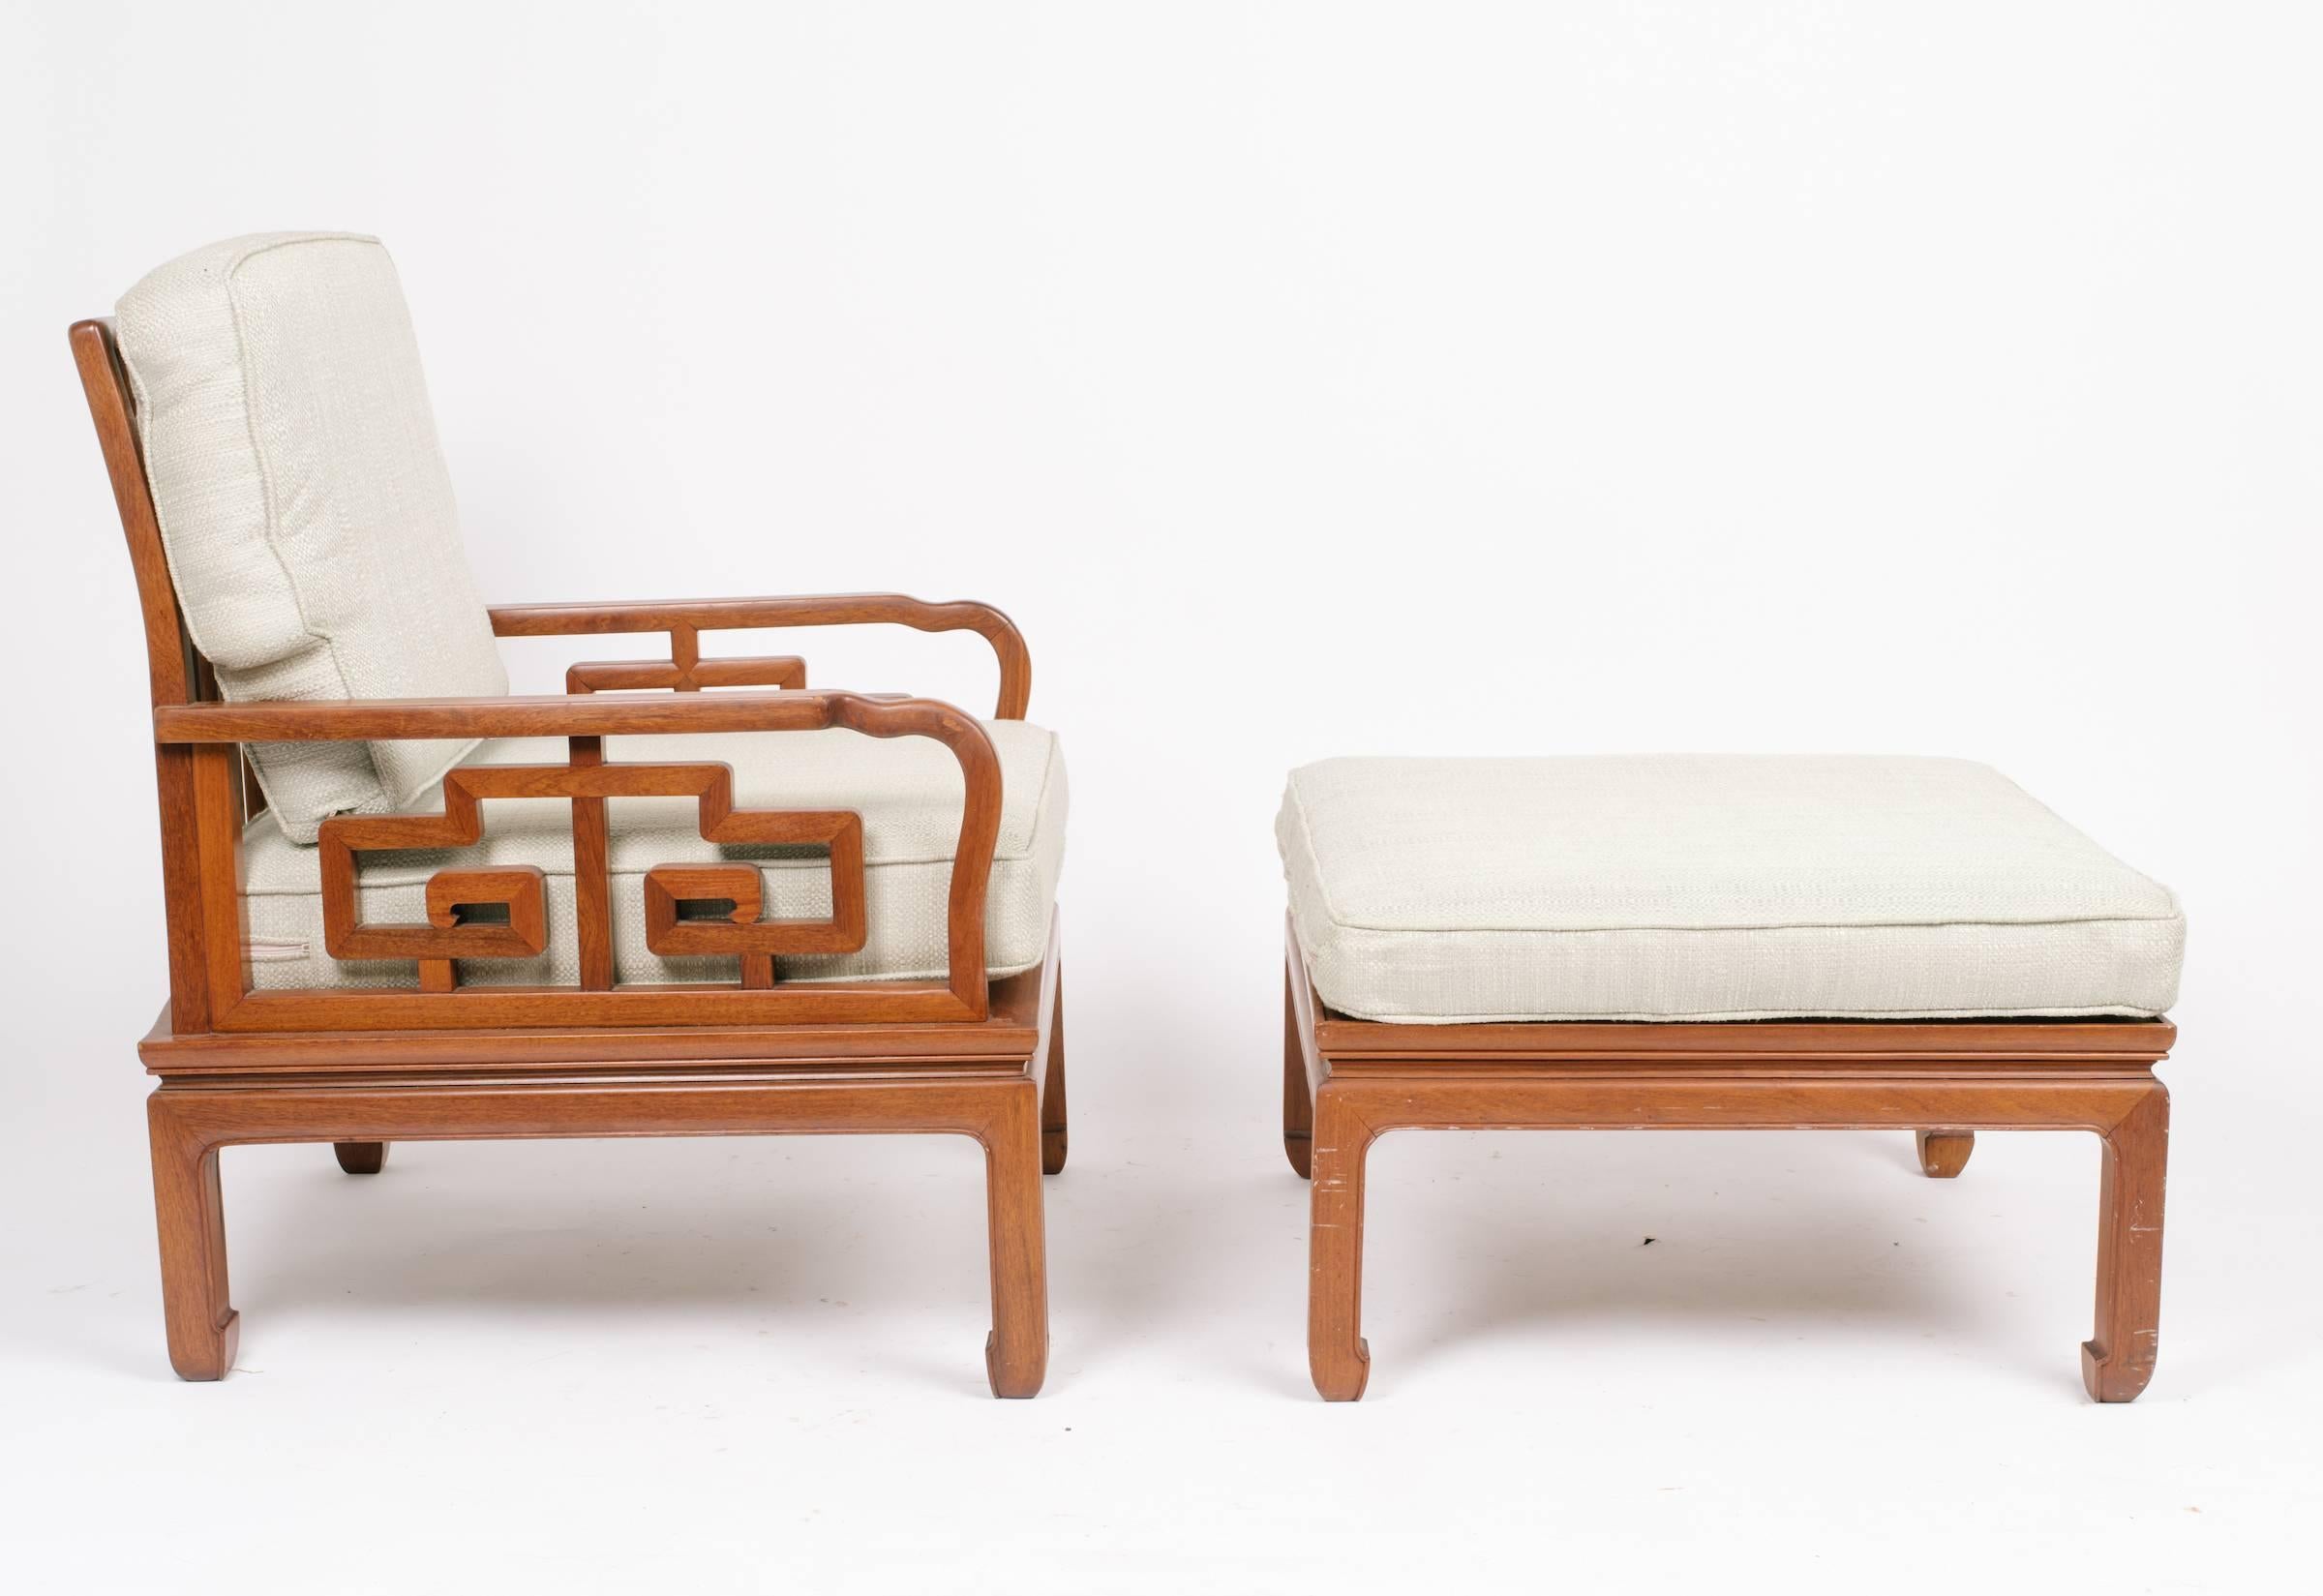 Pair of Asian chairs and matching ottomans from the 1960s.